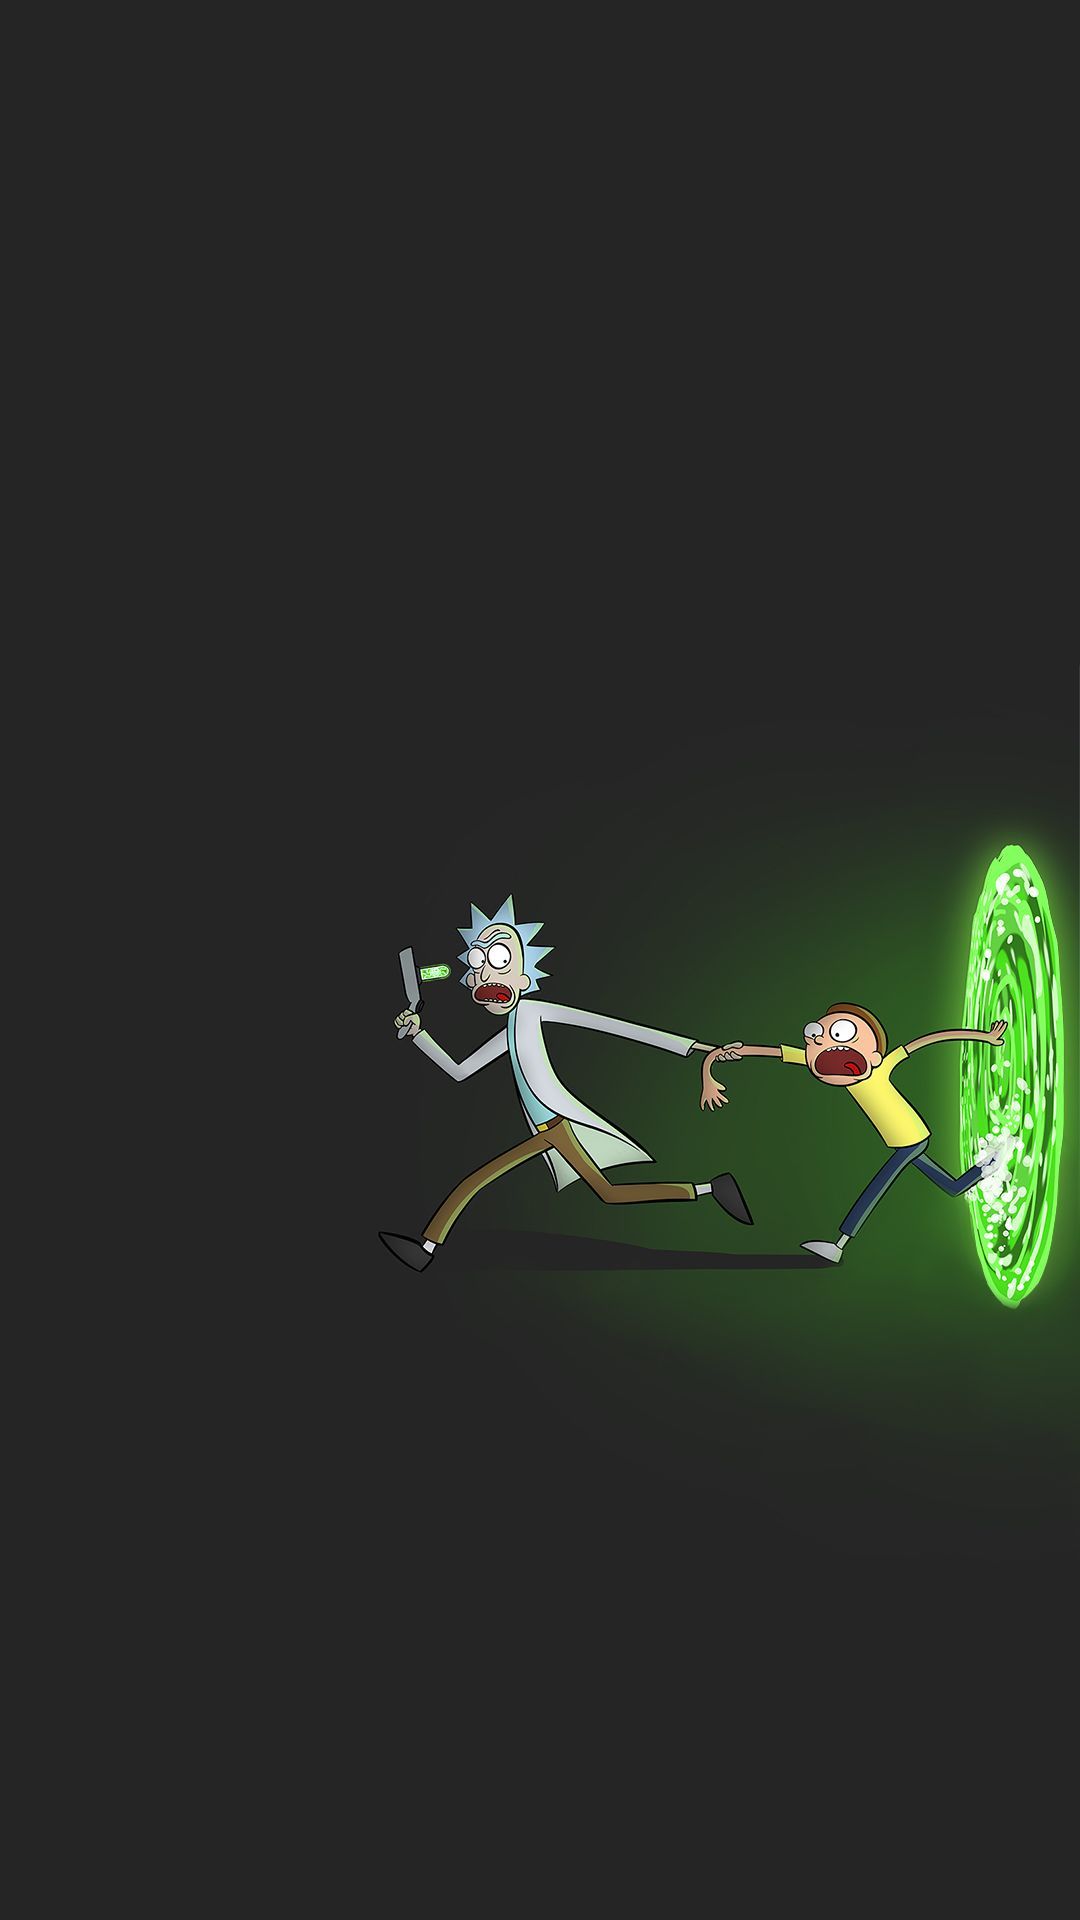 Rick and morty wallpapers hd for iphone